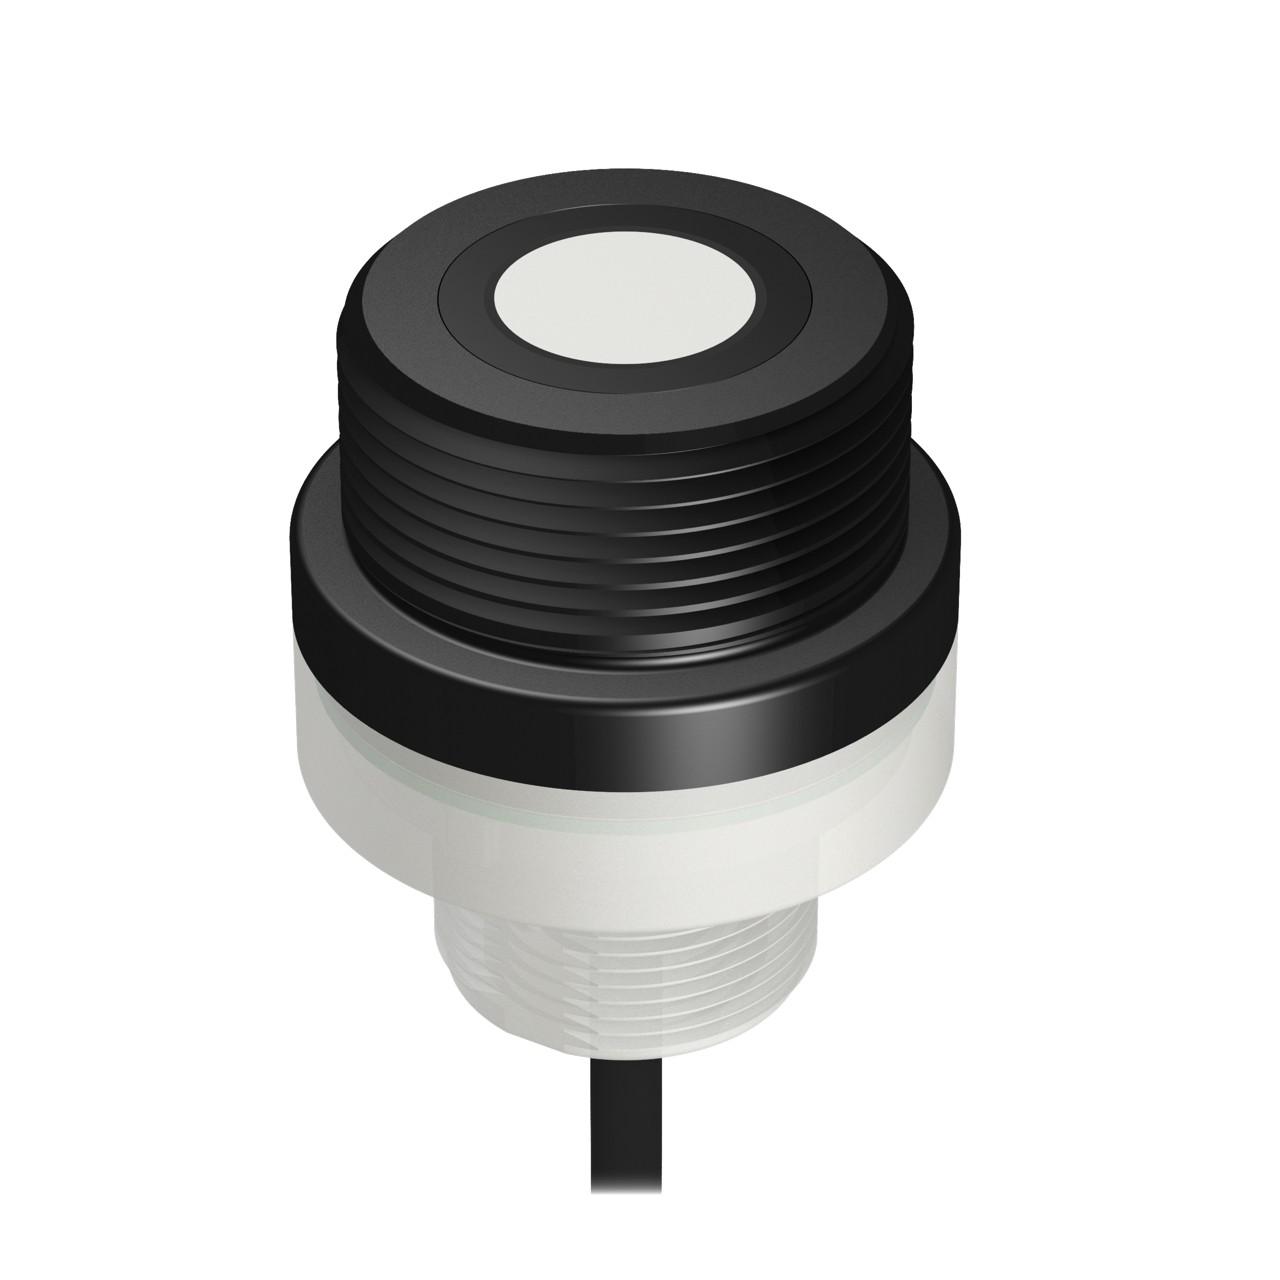 Banner K50UX1ARA K50 Ultrasonic Sensor, 1-Wire Serial Interface, Range: 100 mm to 1 m (3.94 in to 39.4 in), 230 mm (9 in) QD Cable